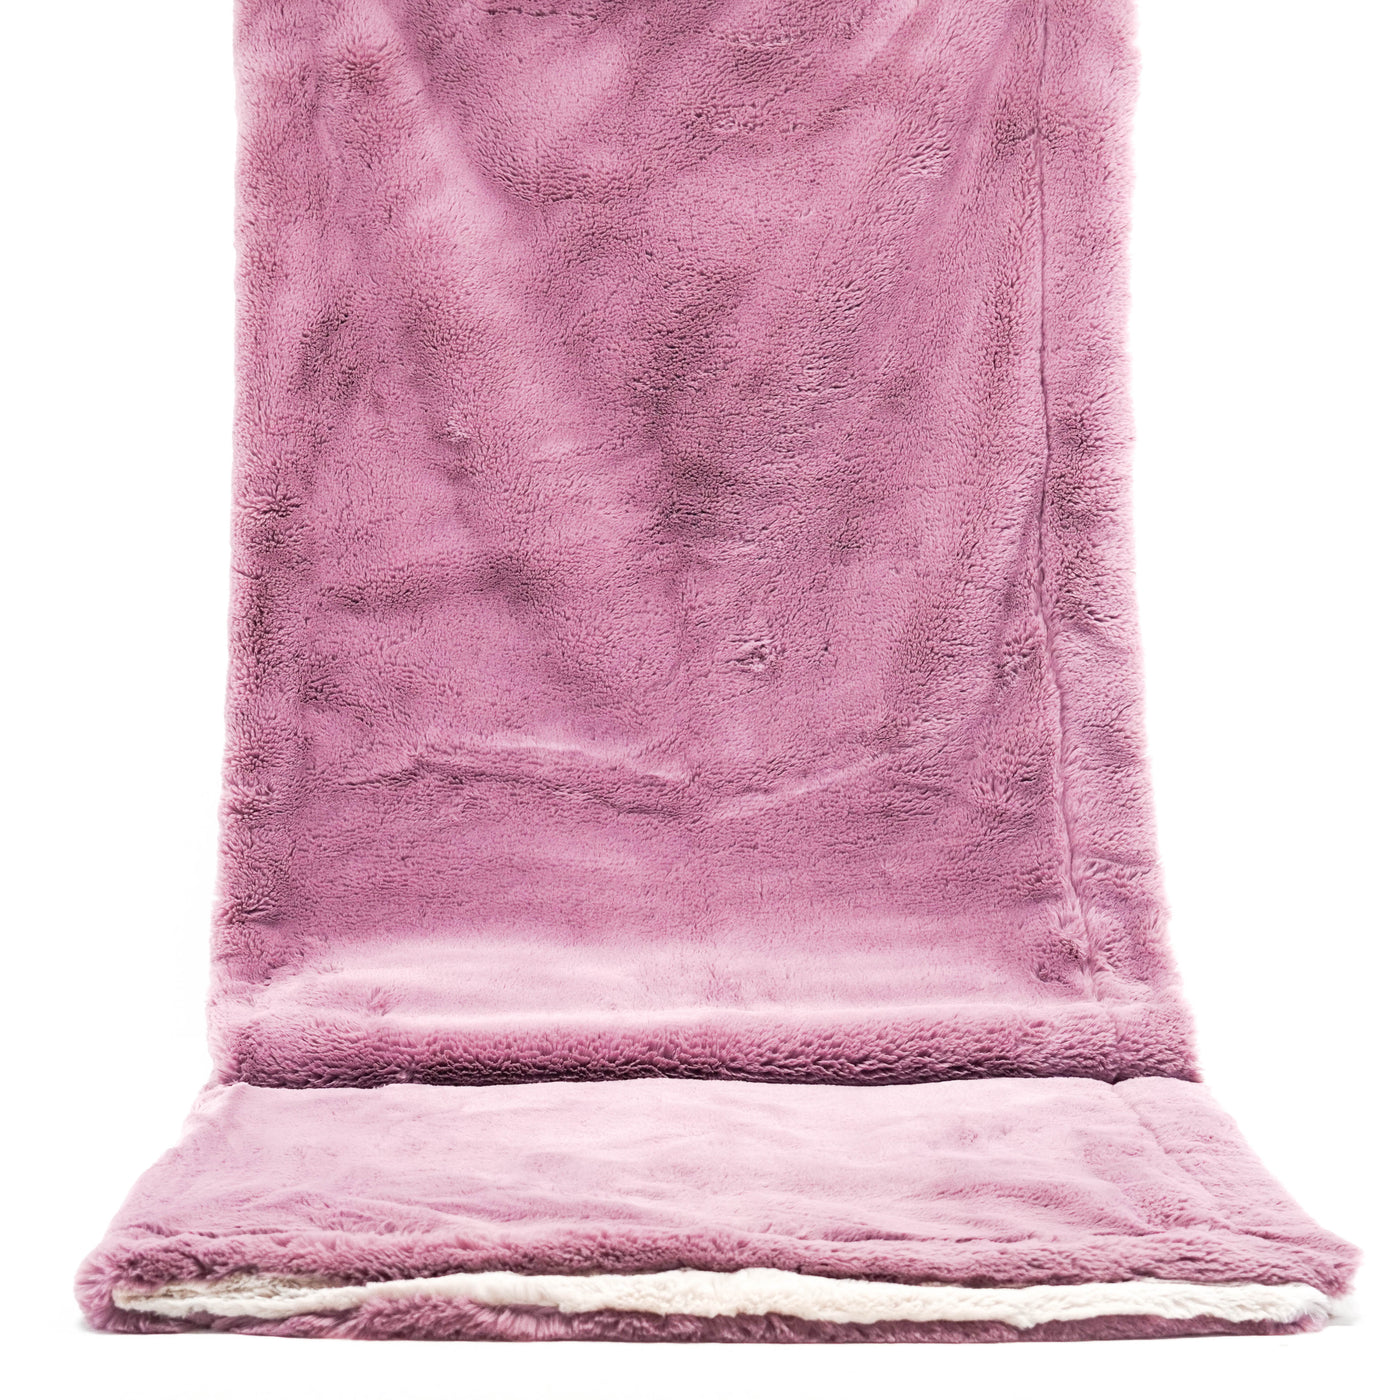 Adult Sized Minky Blanket - Misty Mauve Bunny w/ Pearl Bunny-Adult Sized Minky Blanket-Western-Cowhide-Bags-Handmade-Products-Gifts-Dancing Cactus Designs